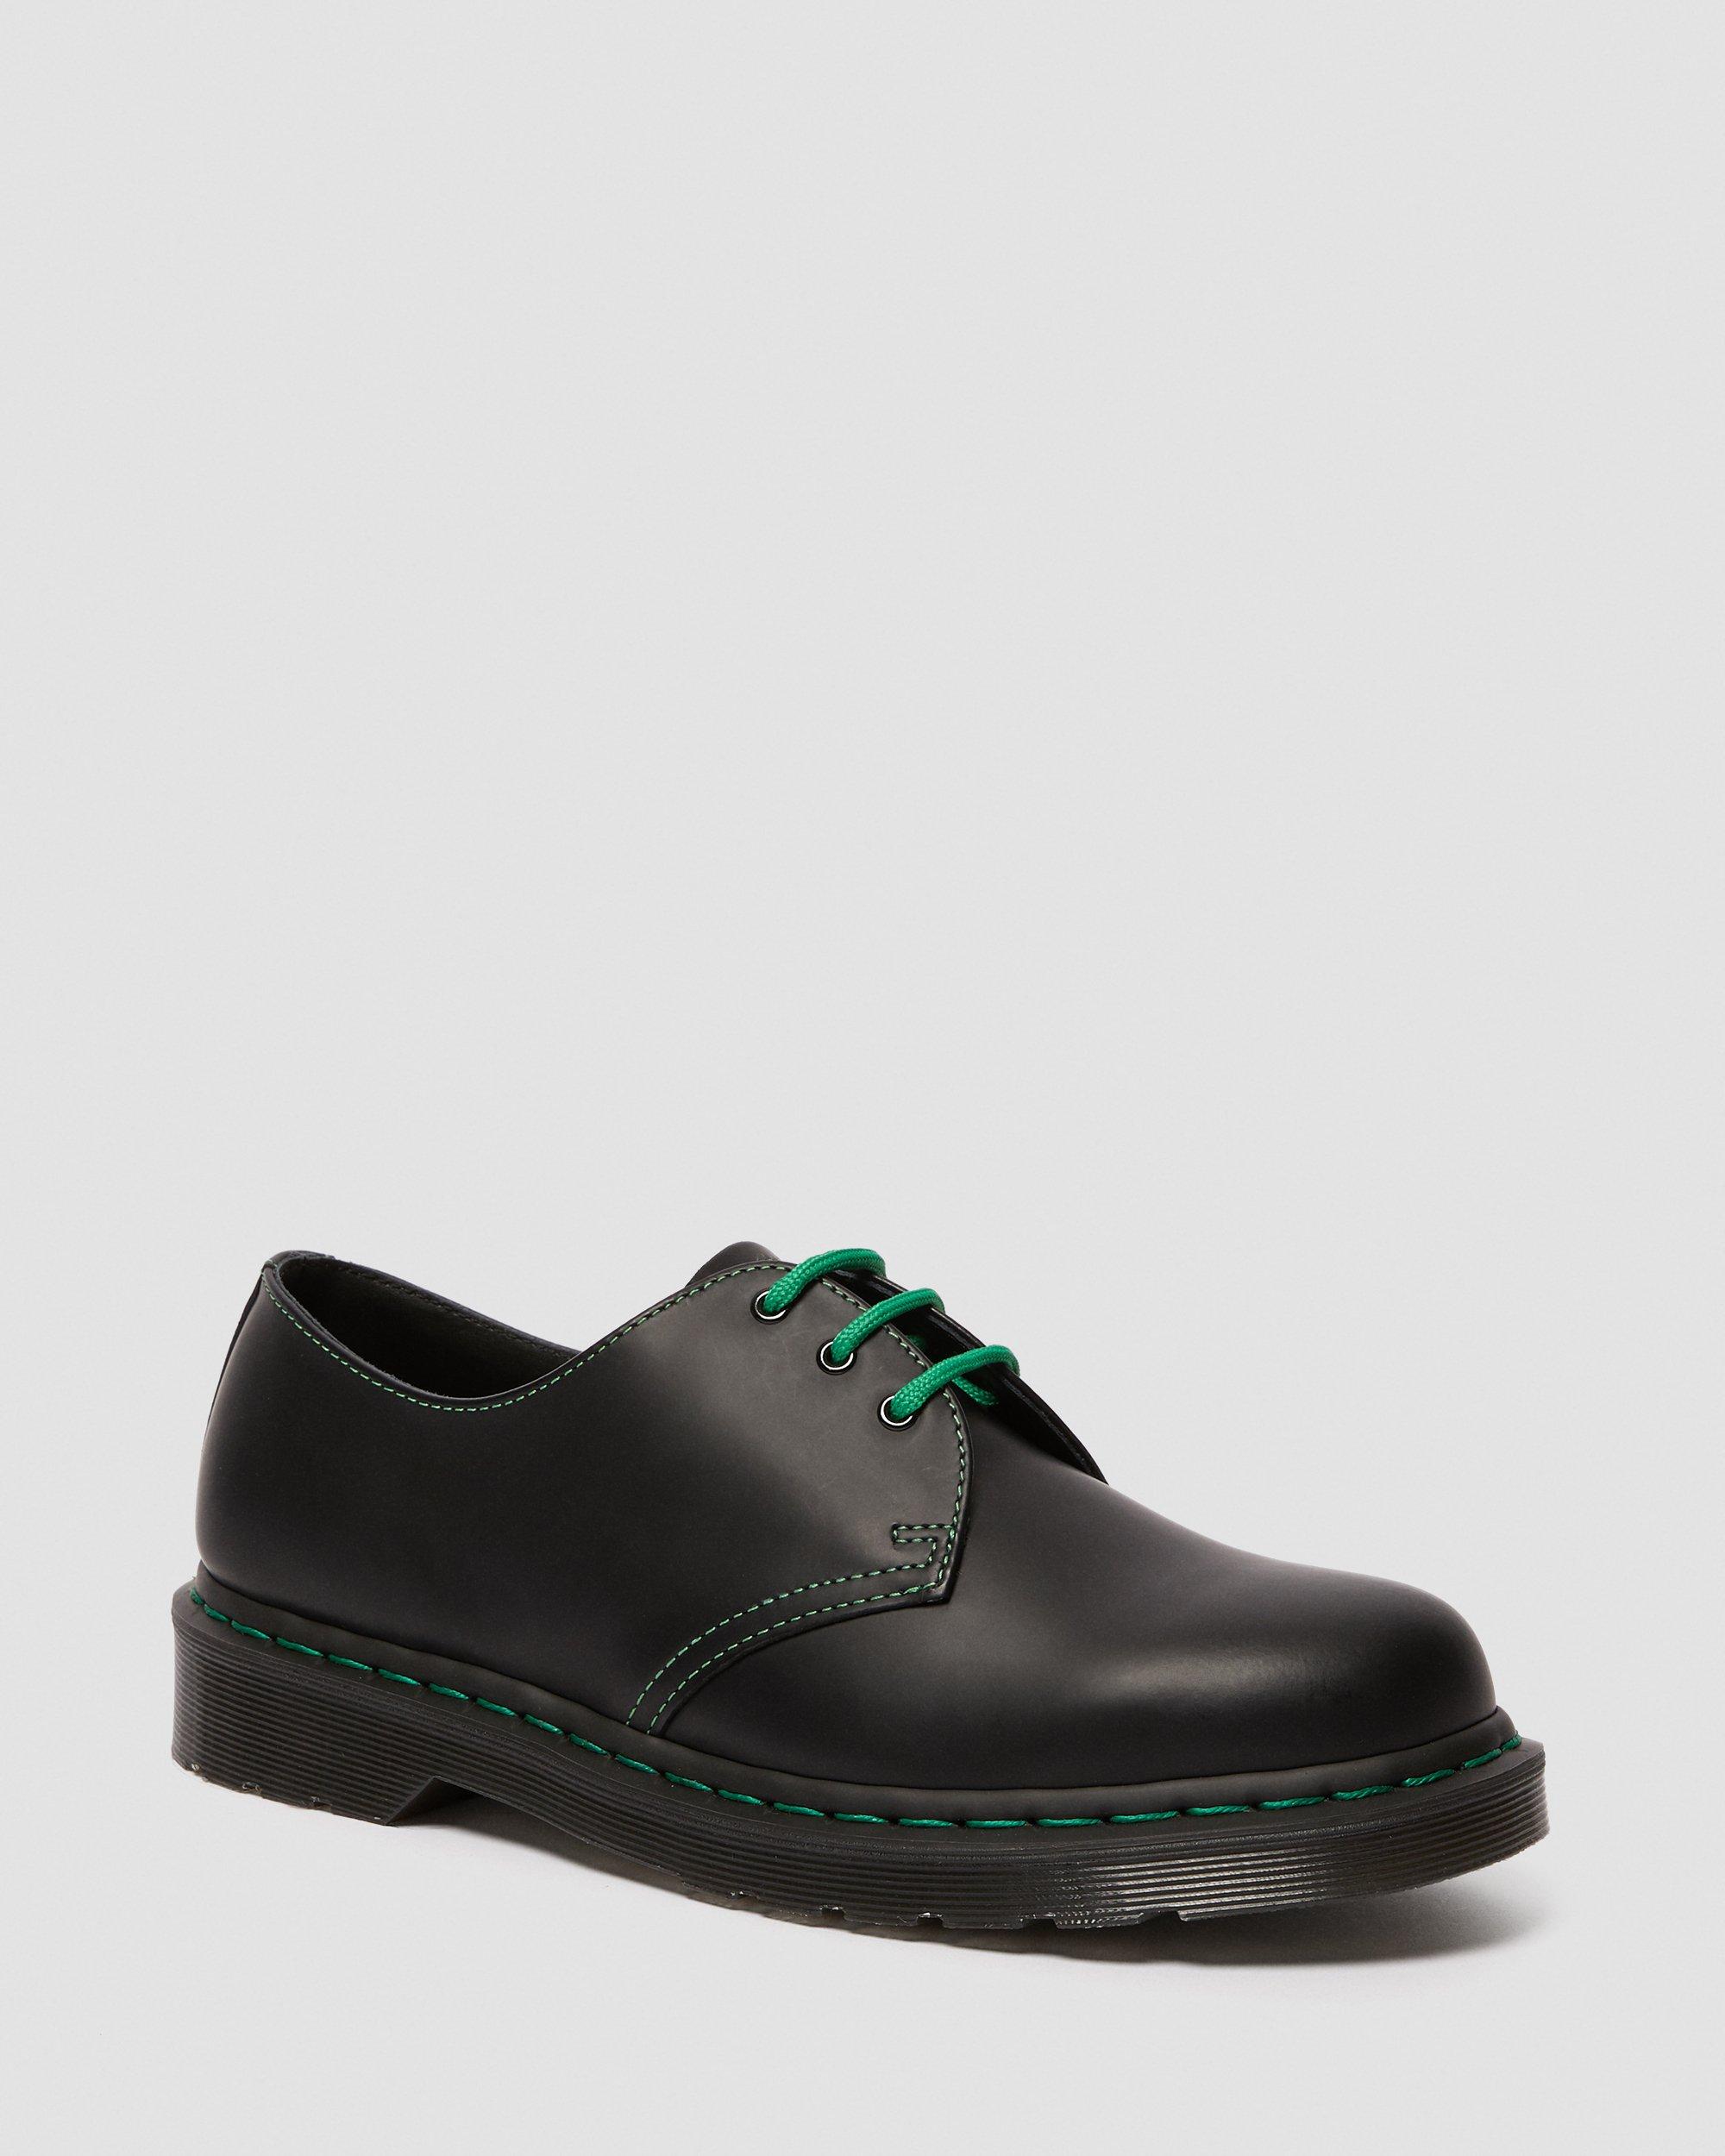 1461 Contrast Stitch Smooth Leather Oxford Shoes in Black | Dr